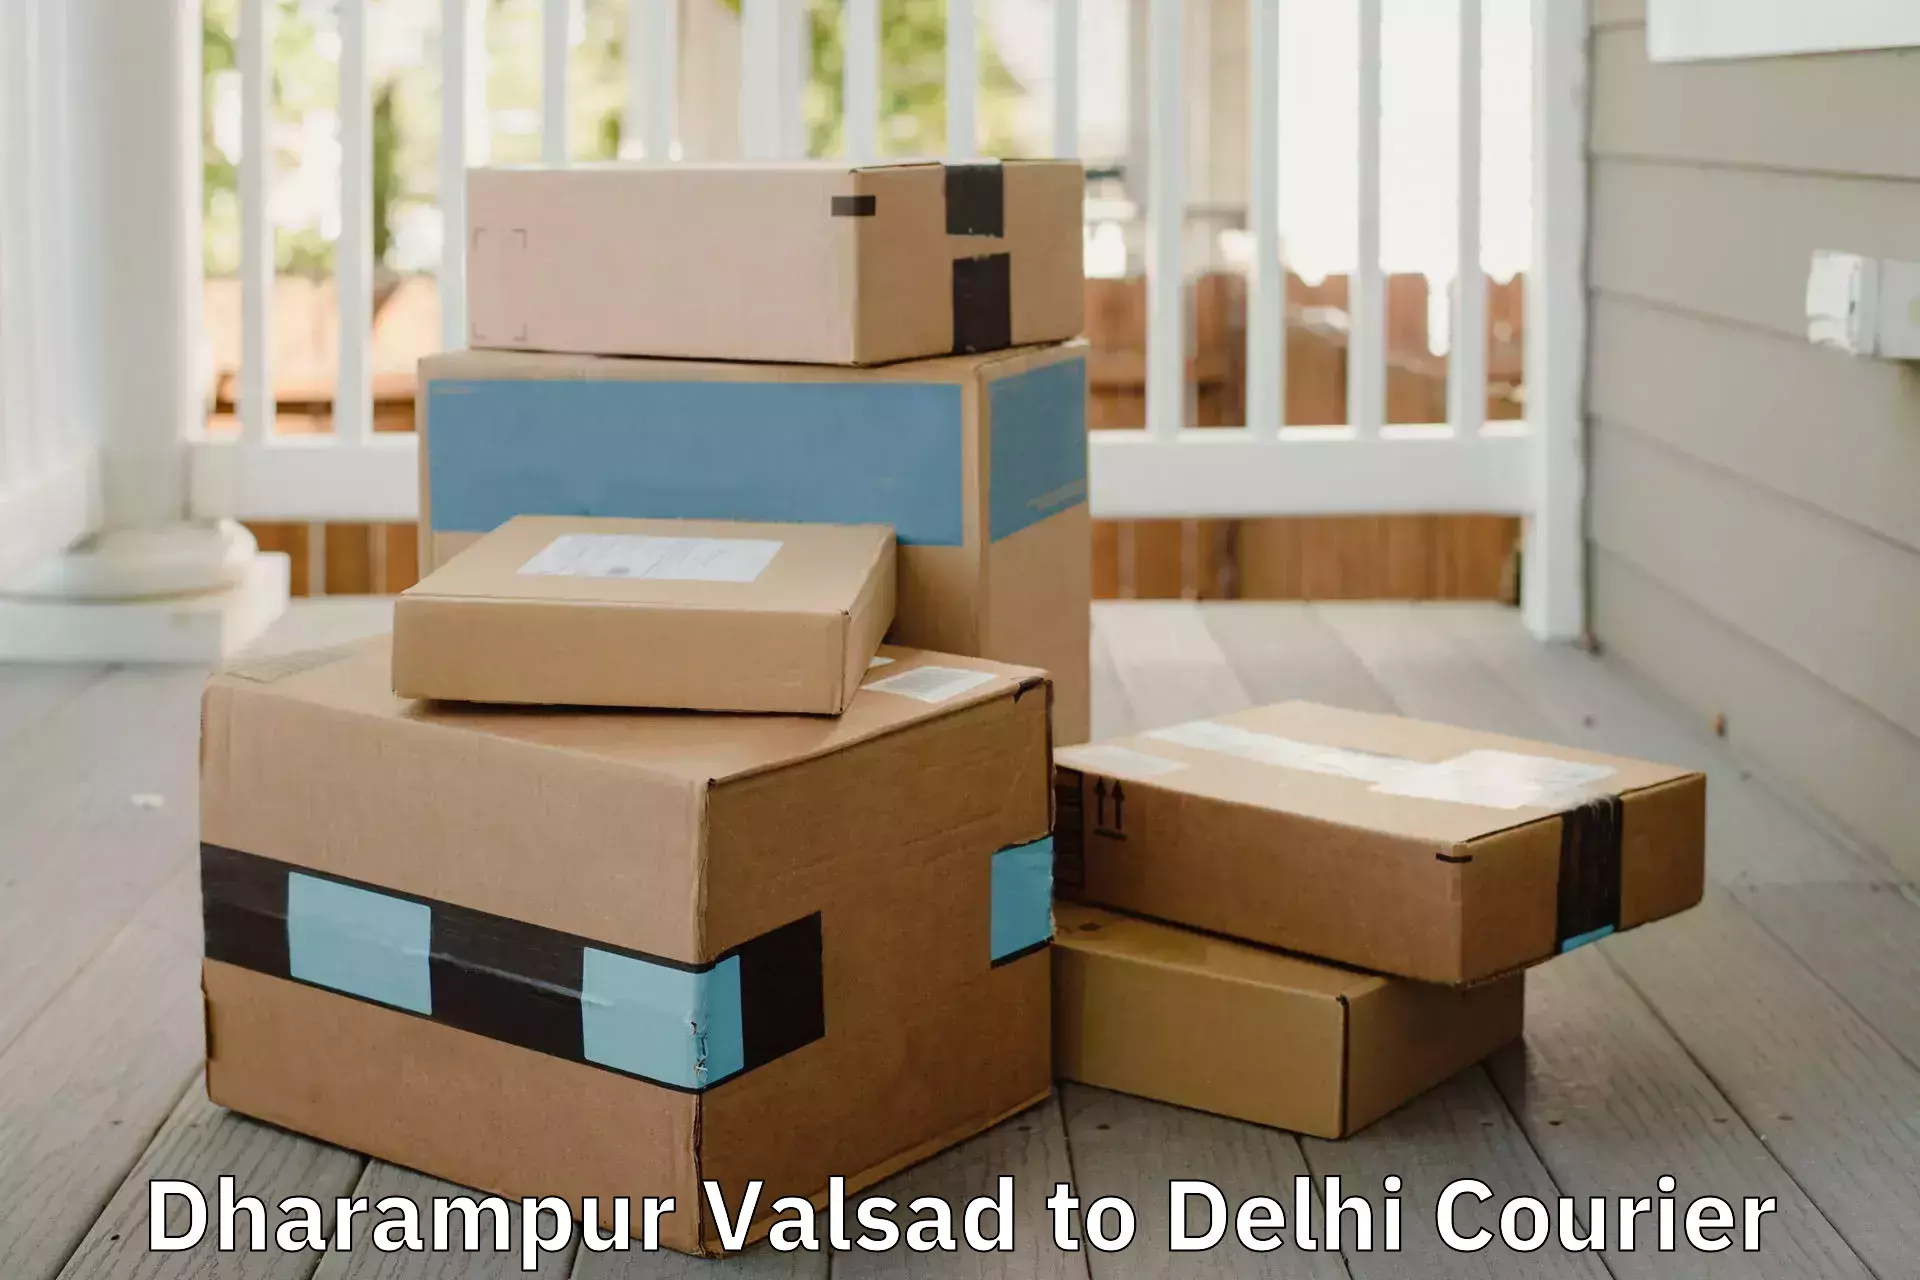 Moving and storage services in Dharampur Valsad to Delhi